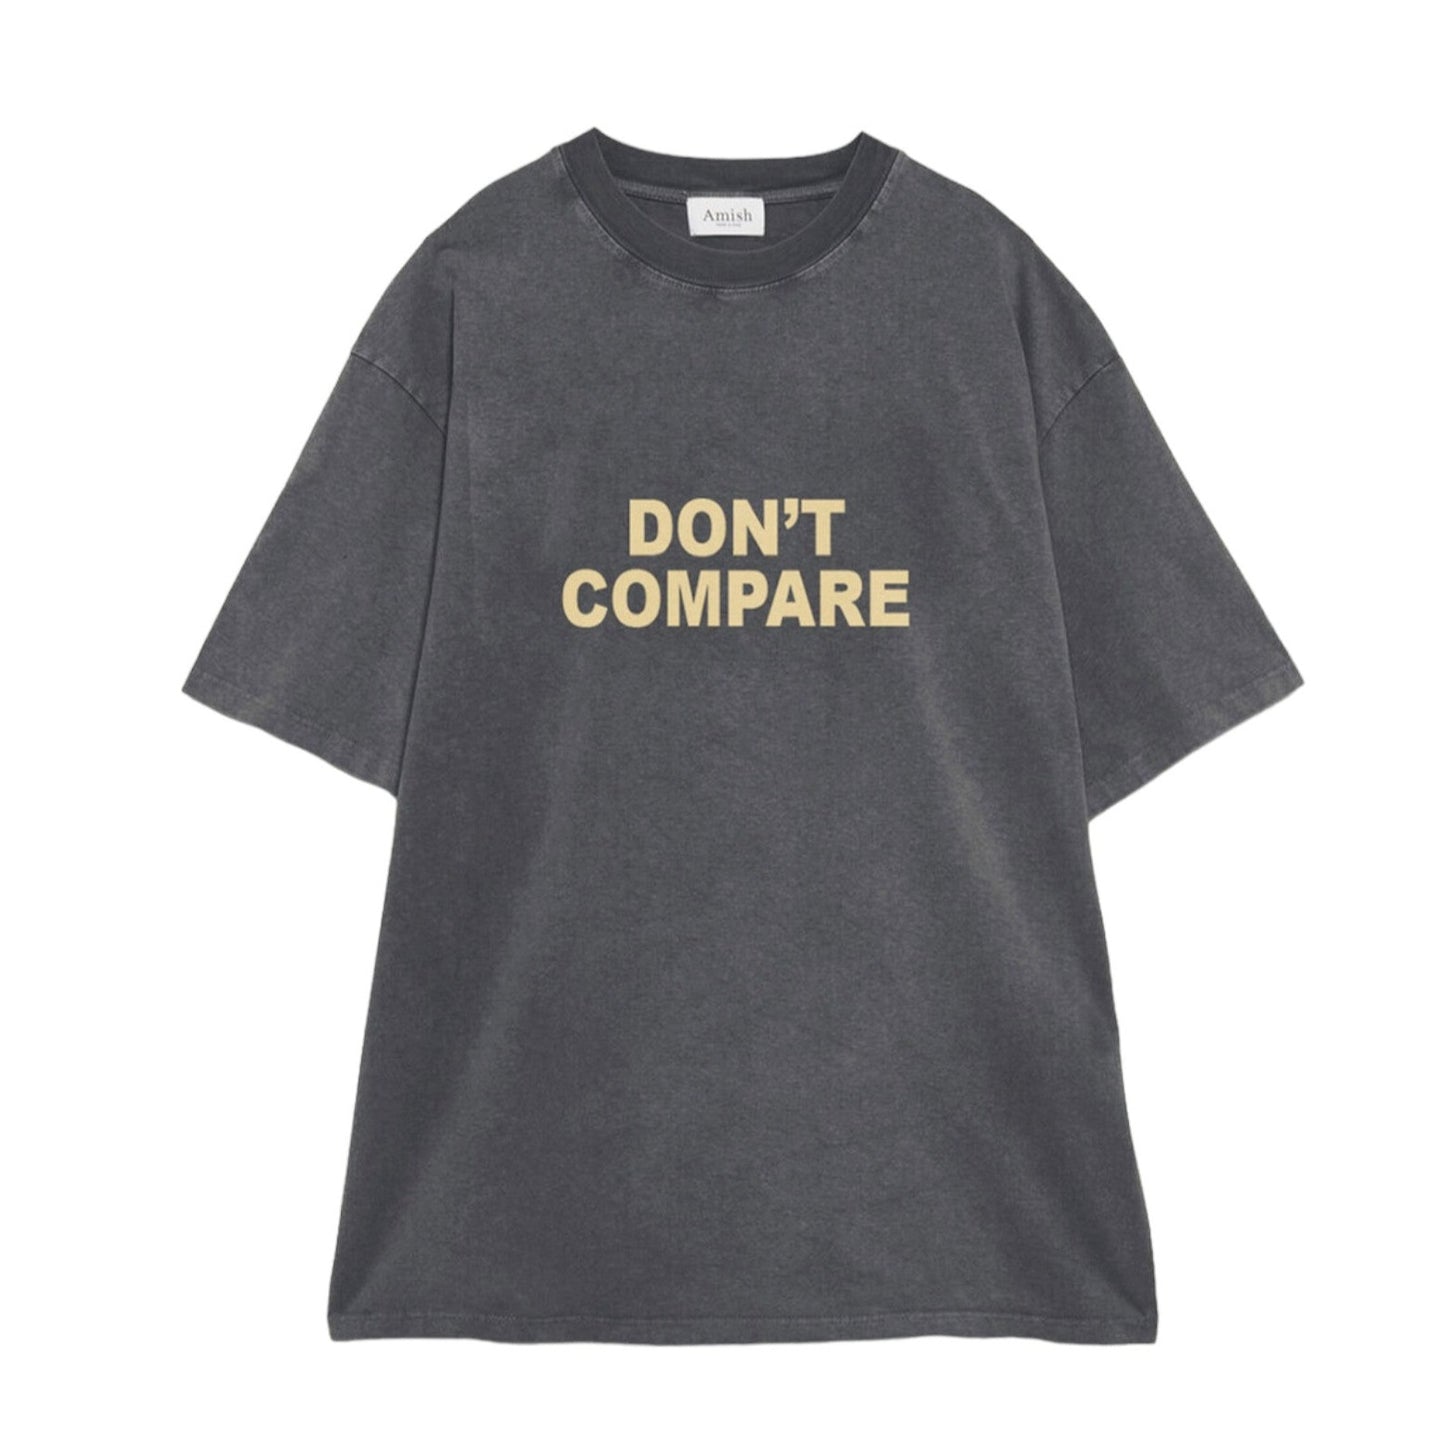 T-shirt oversize Amish Don't compare MAN AMISH Jersey Pigment Washed black/Banana - Francis Concept